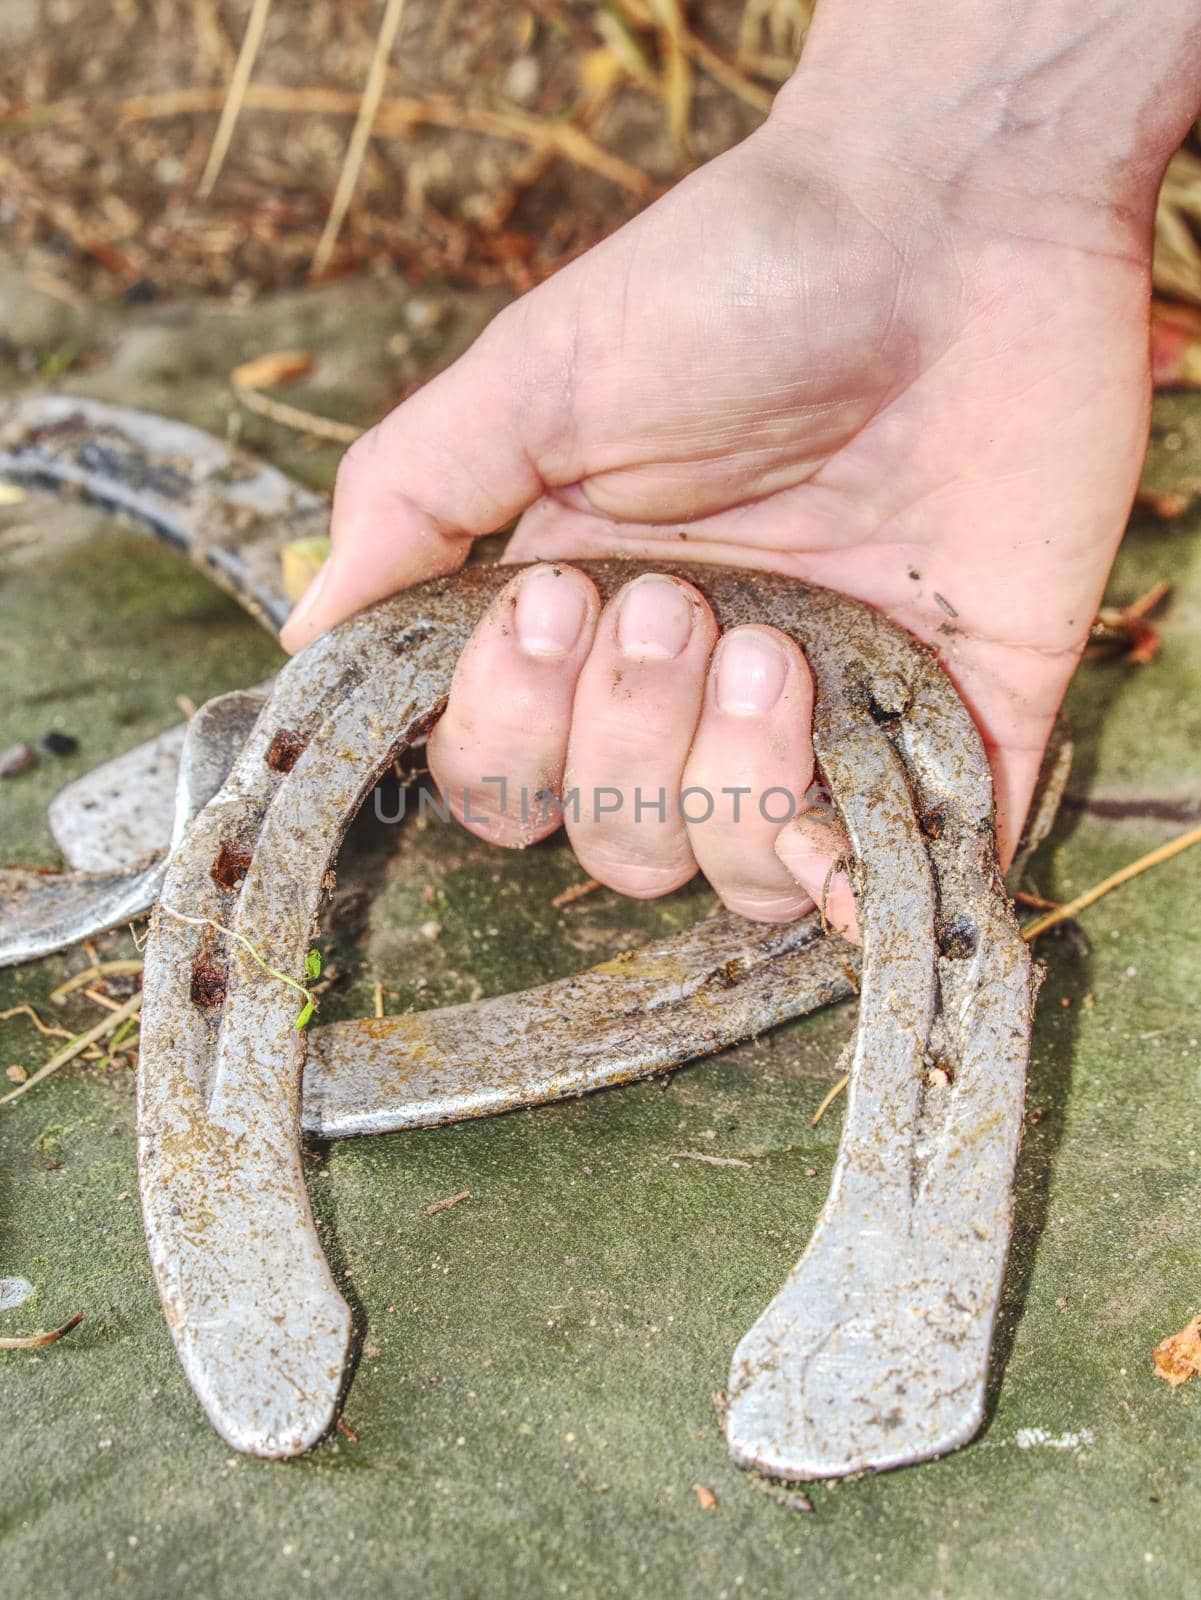 Silver used horse shoes on palm of young woman in red jacket.  Fall season still with obsolet  horseshoes on wet ground dotted with fallen leaves.